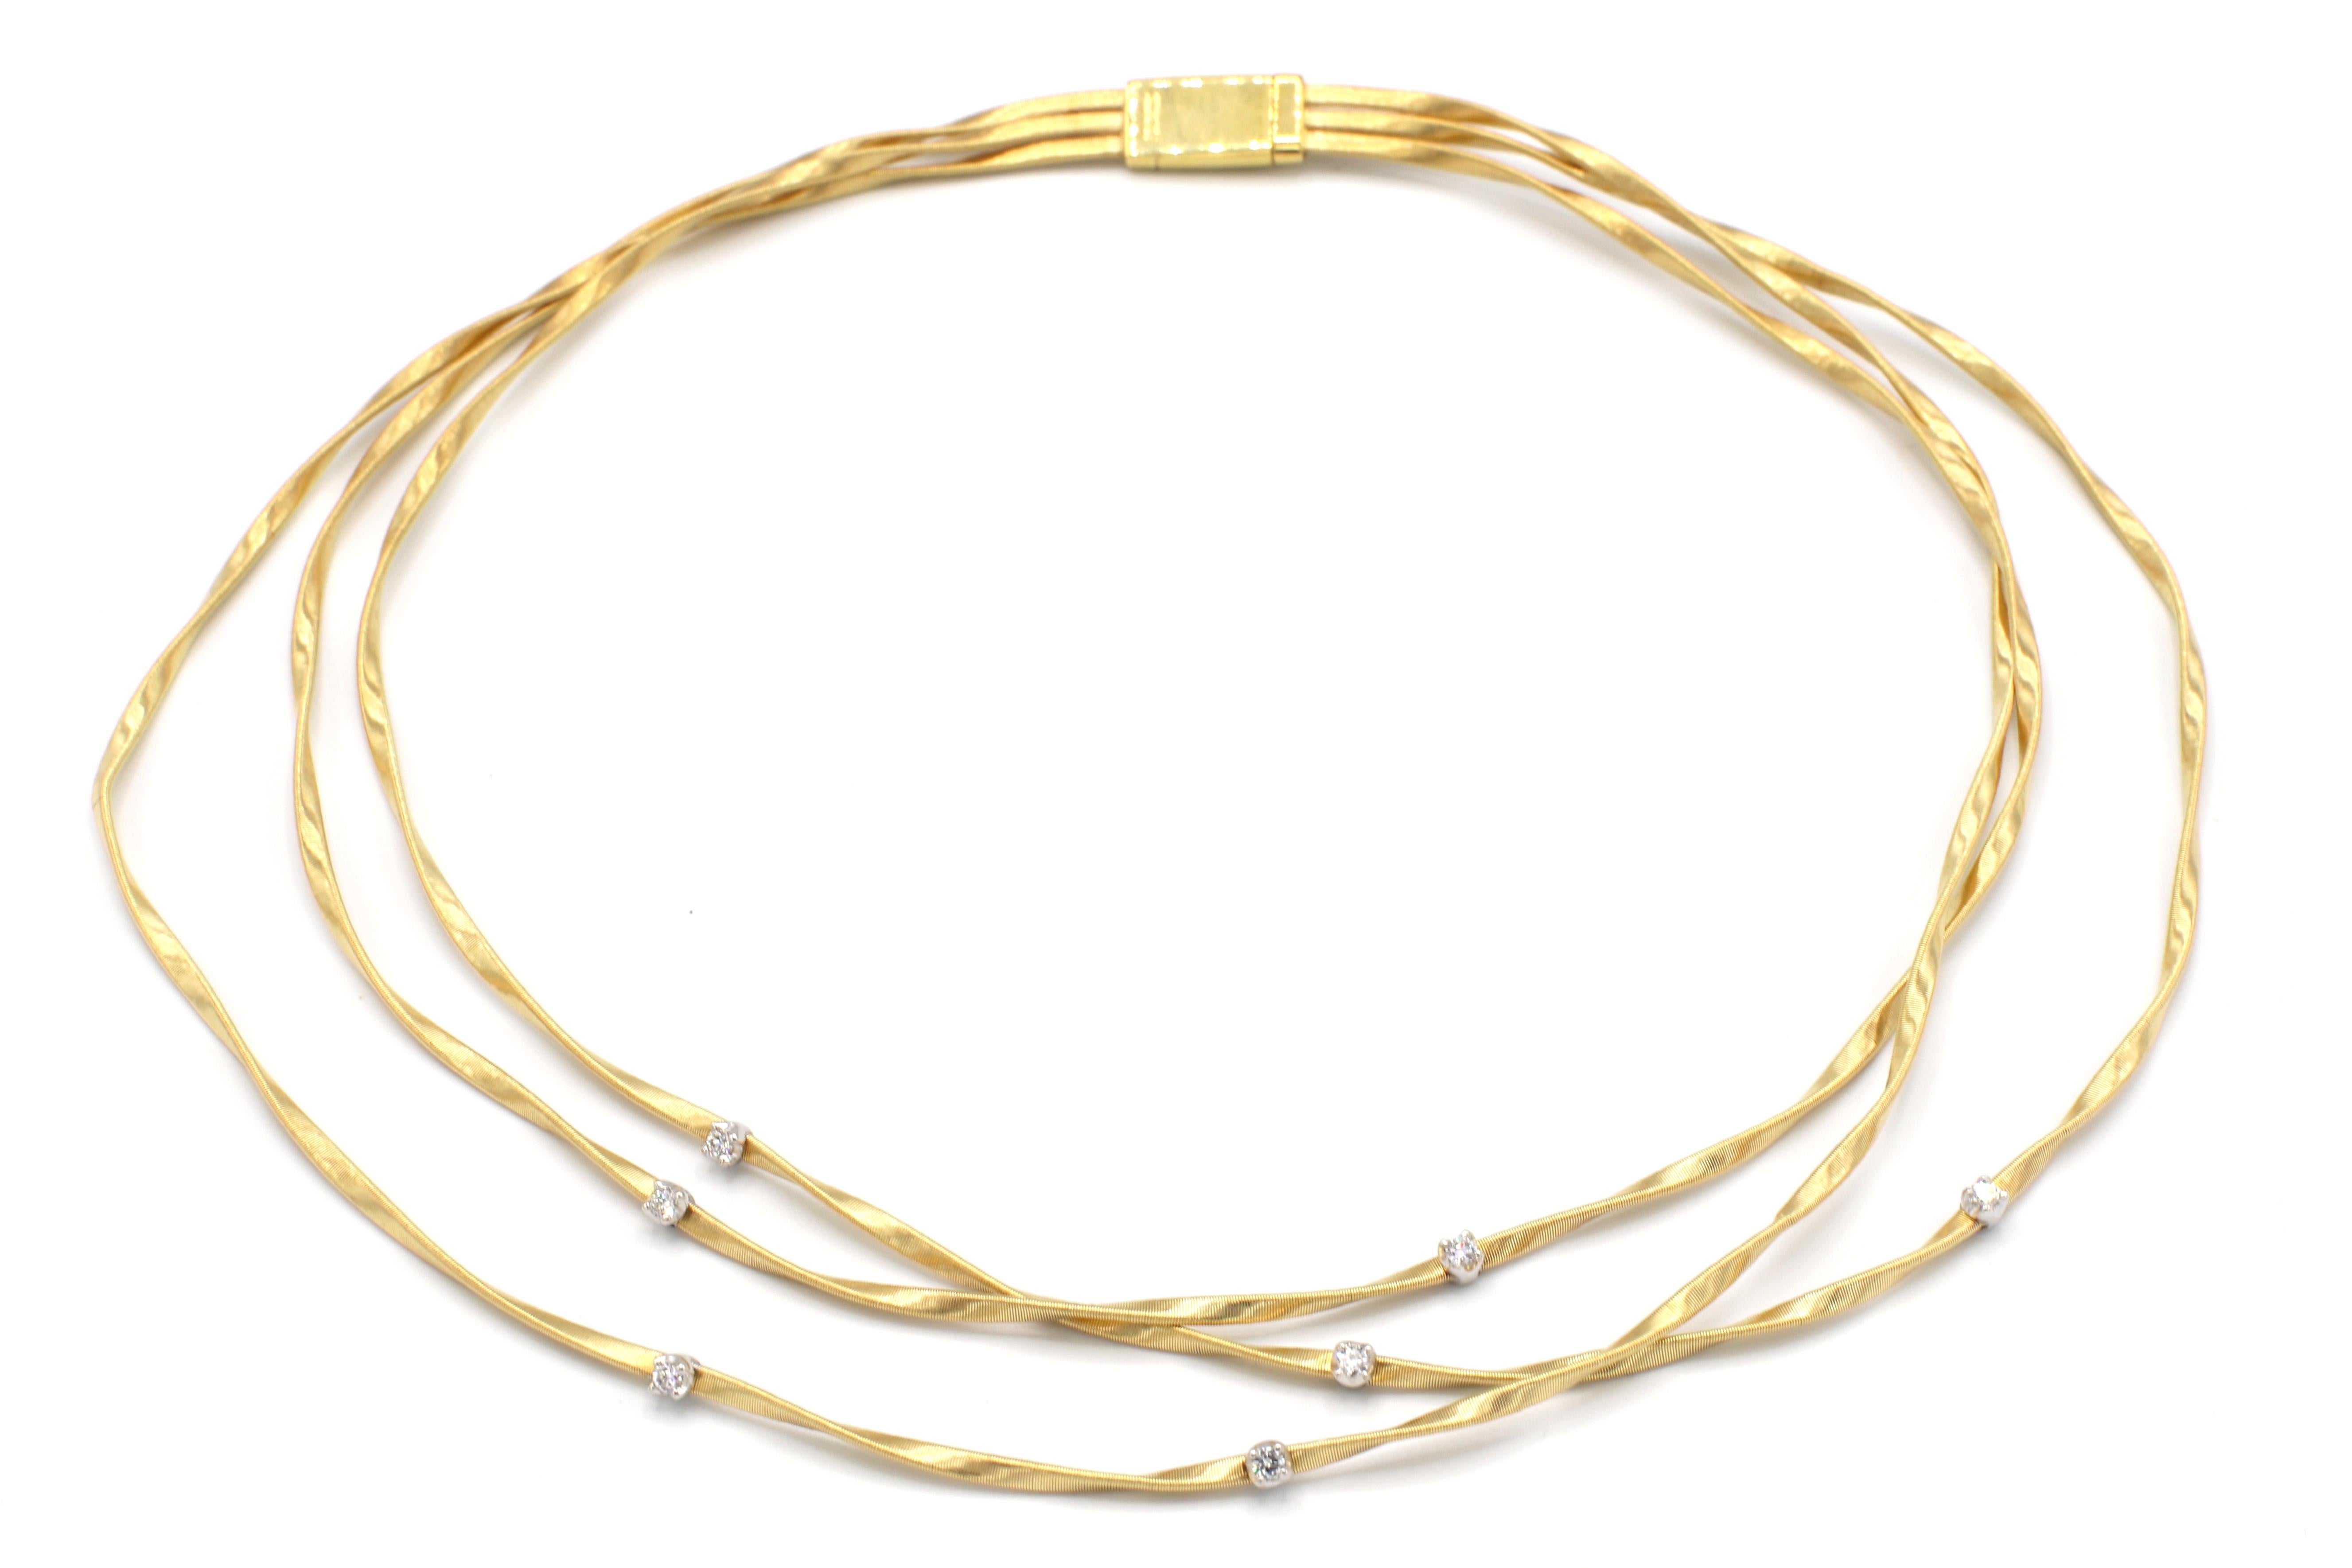 Marco Bicego Marrakech Collection 18 Karat Yellow Gold & Diamond 3 Row Necklace
Metal: 18k yellow gold
Weight: 34.7 grams
Diamonds: Approx. .21 CTW G VS round brilliant cut 
Length: 16.5 inches - 18 inches 
Signed: Marco Bicego 750 made in Italy